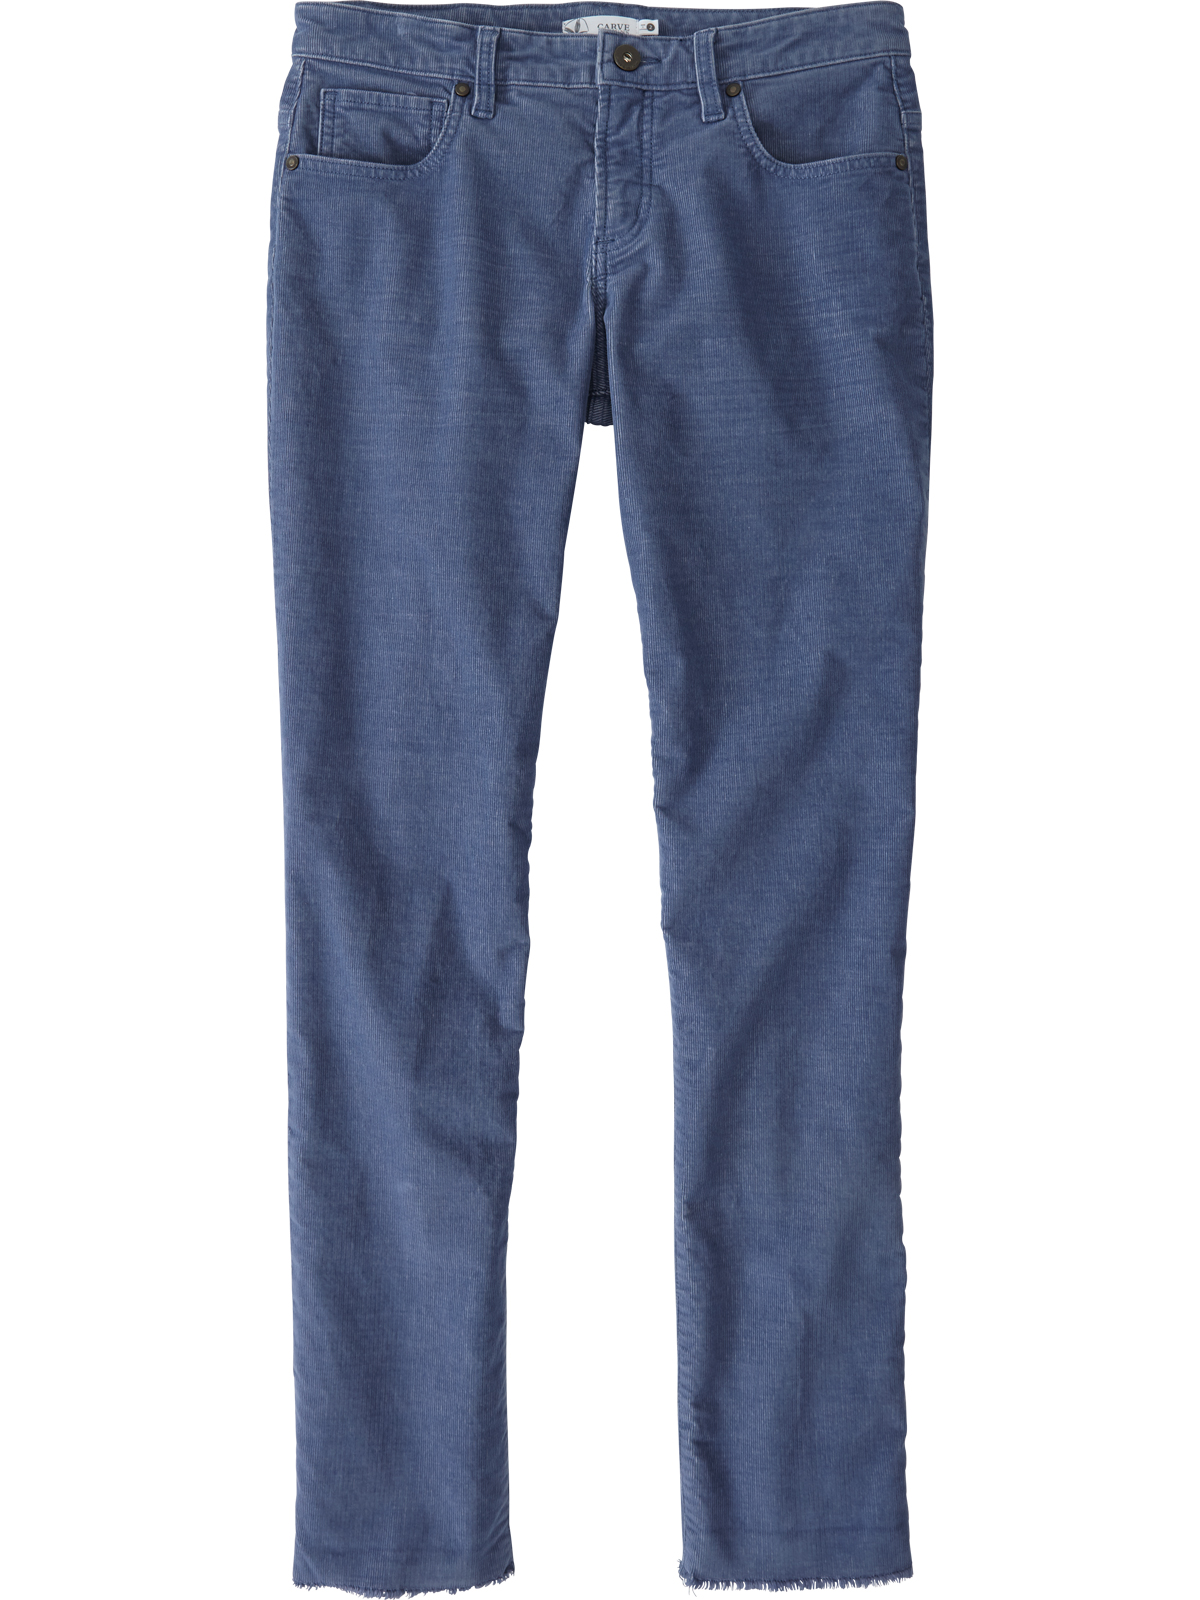 Patagonia Fitted Corduroy Pant - Women's - Women